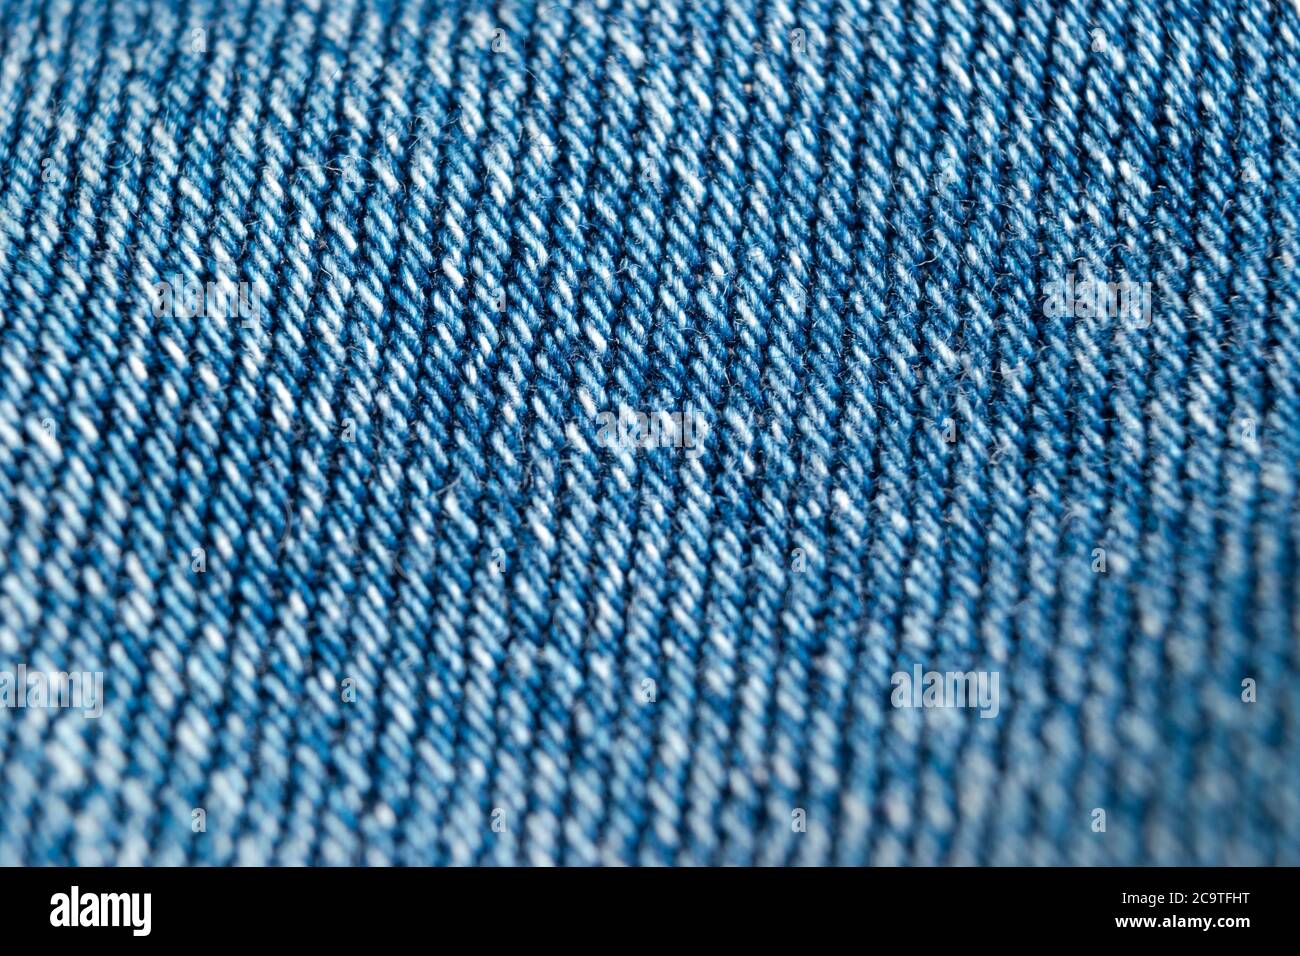 Macro shot Blue jeans fabric texture background. Denim jeans texture.  Closeup texture and pattern of jeans fabric Stock Photo - Alamy